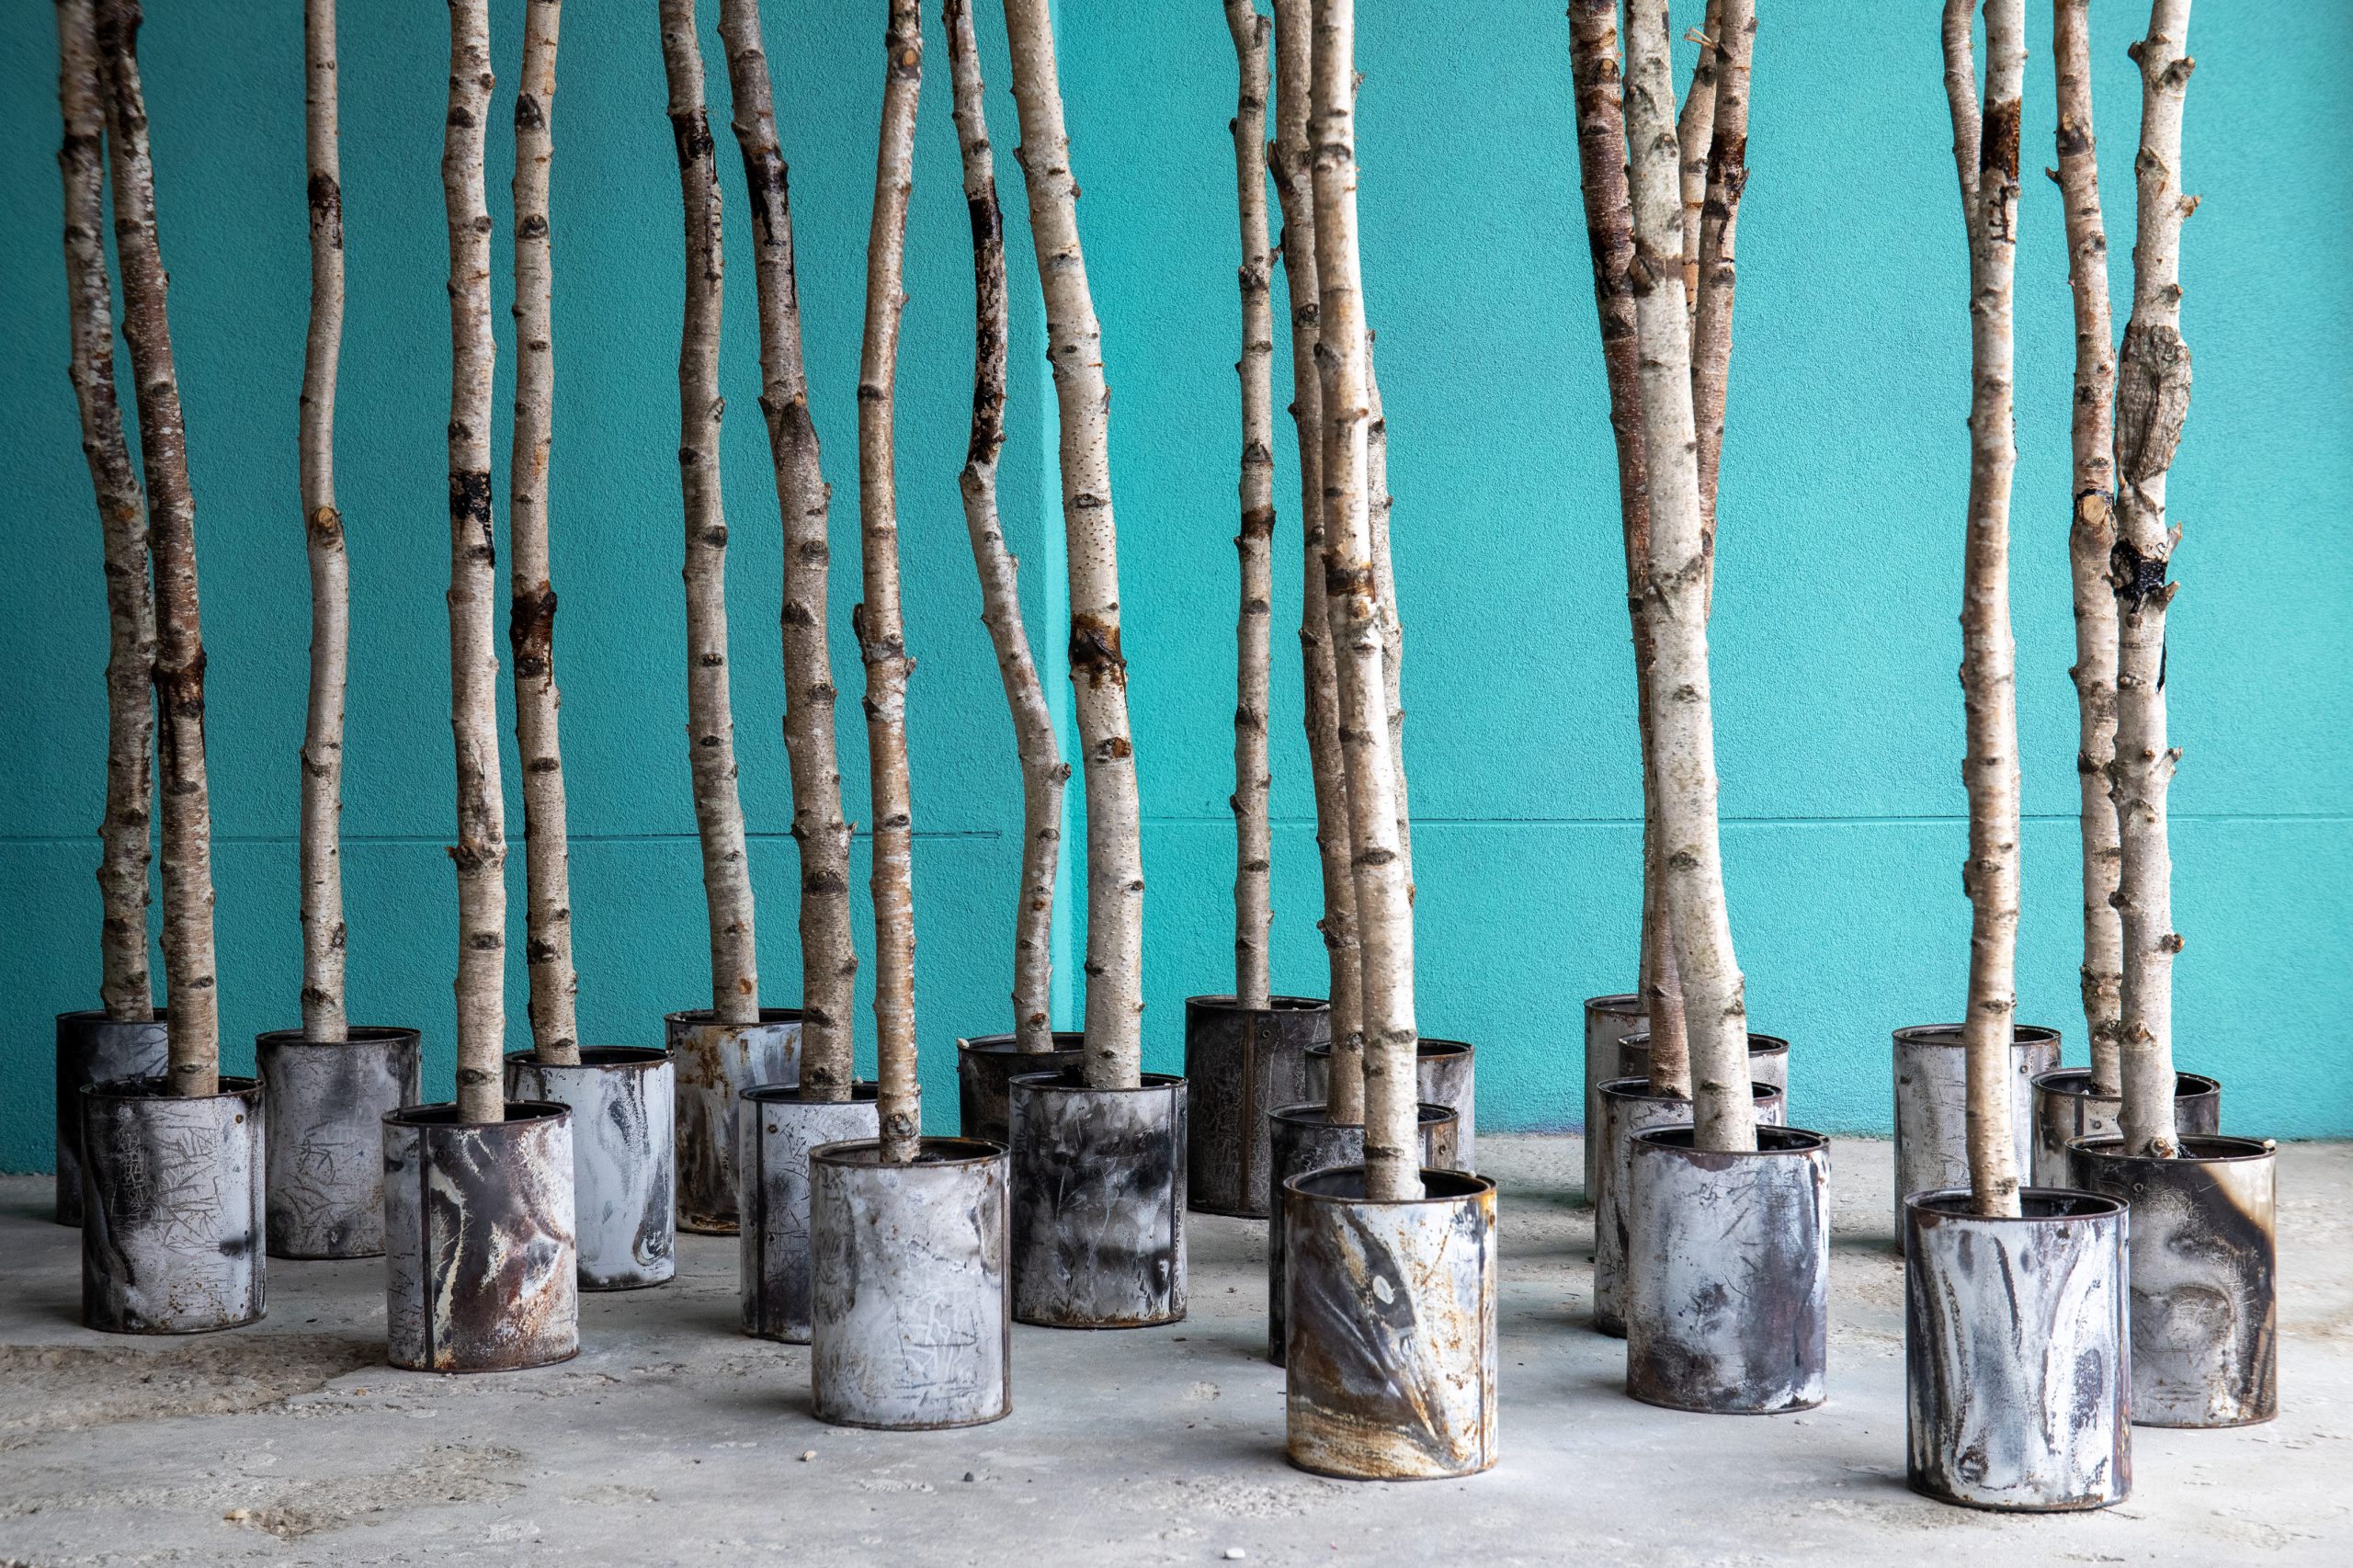 A photograph of some birch trees in ceramic pots, which are all displayed in front of a turquois blue wall.